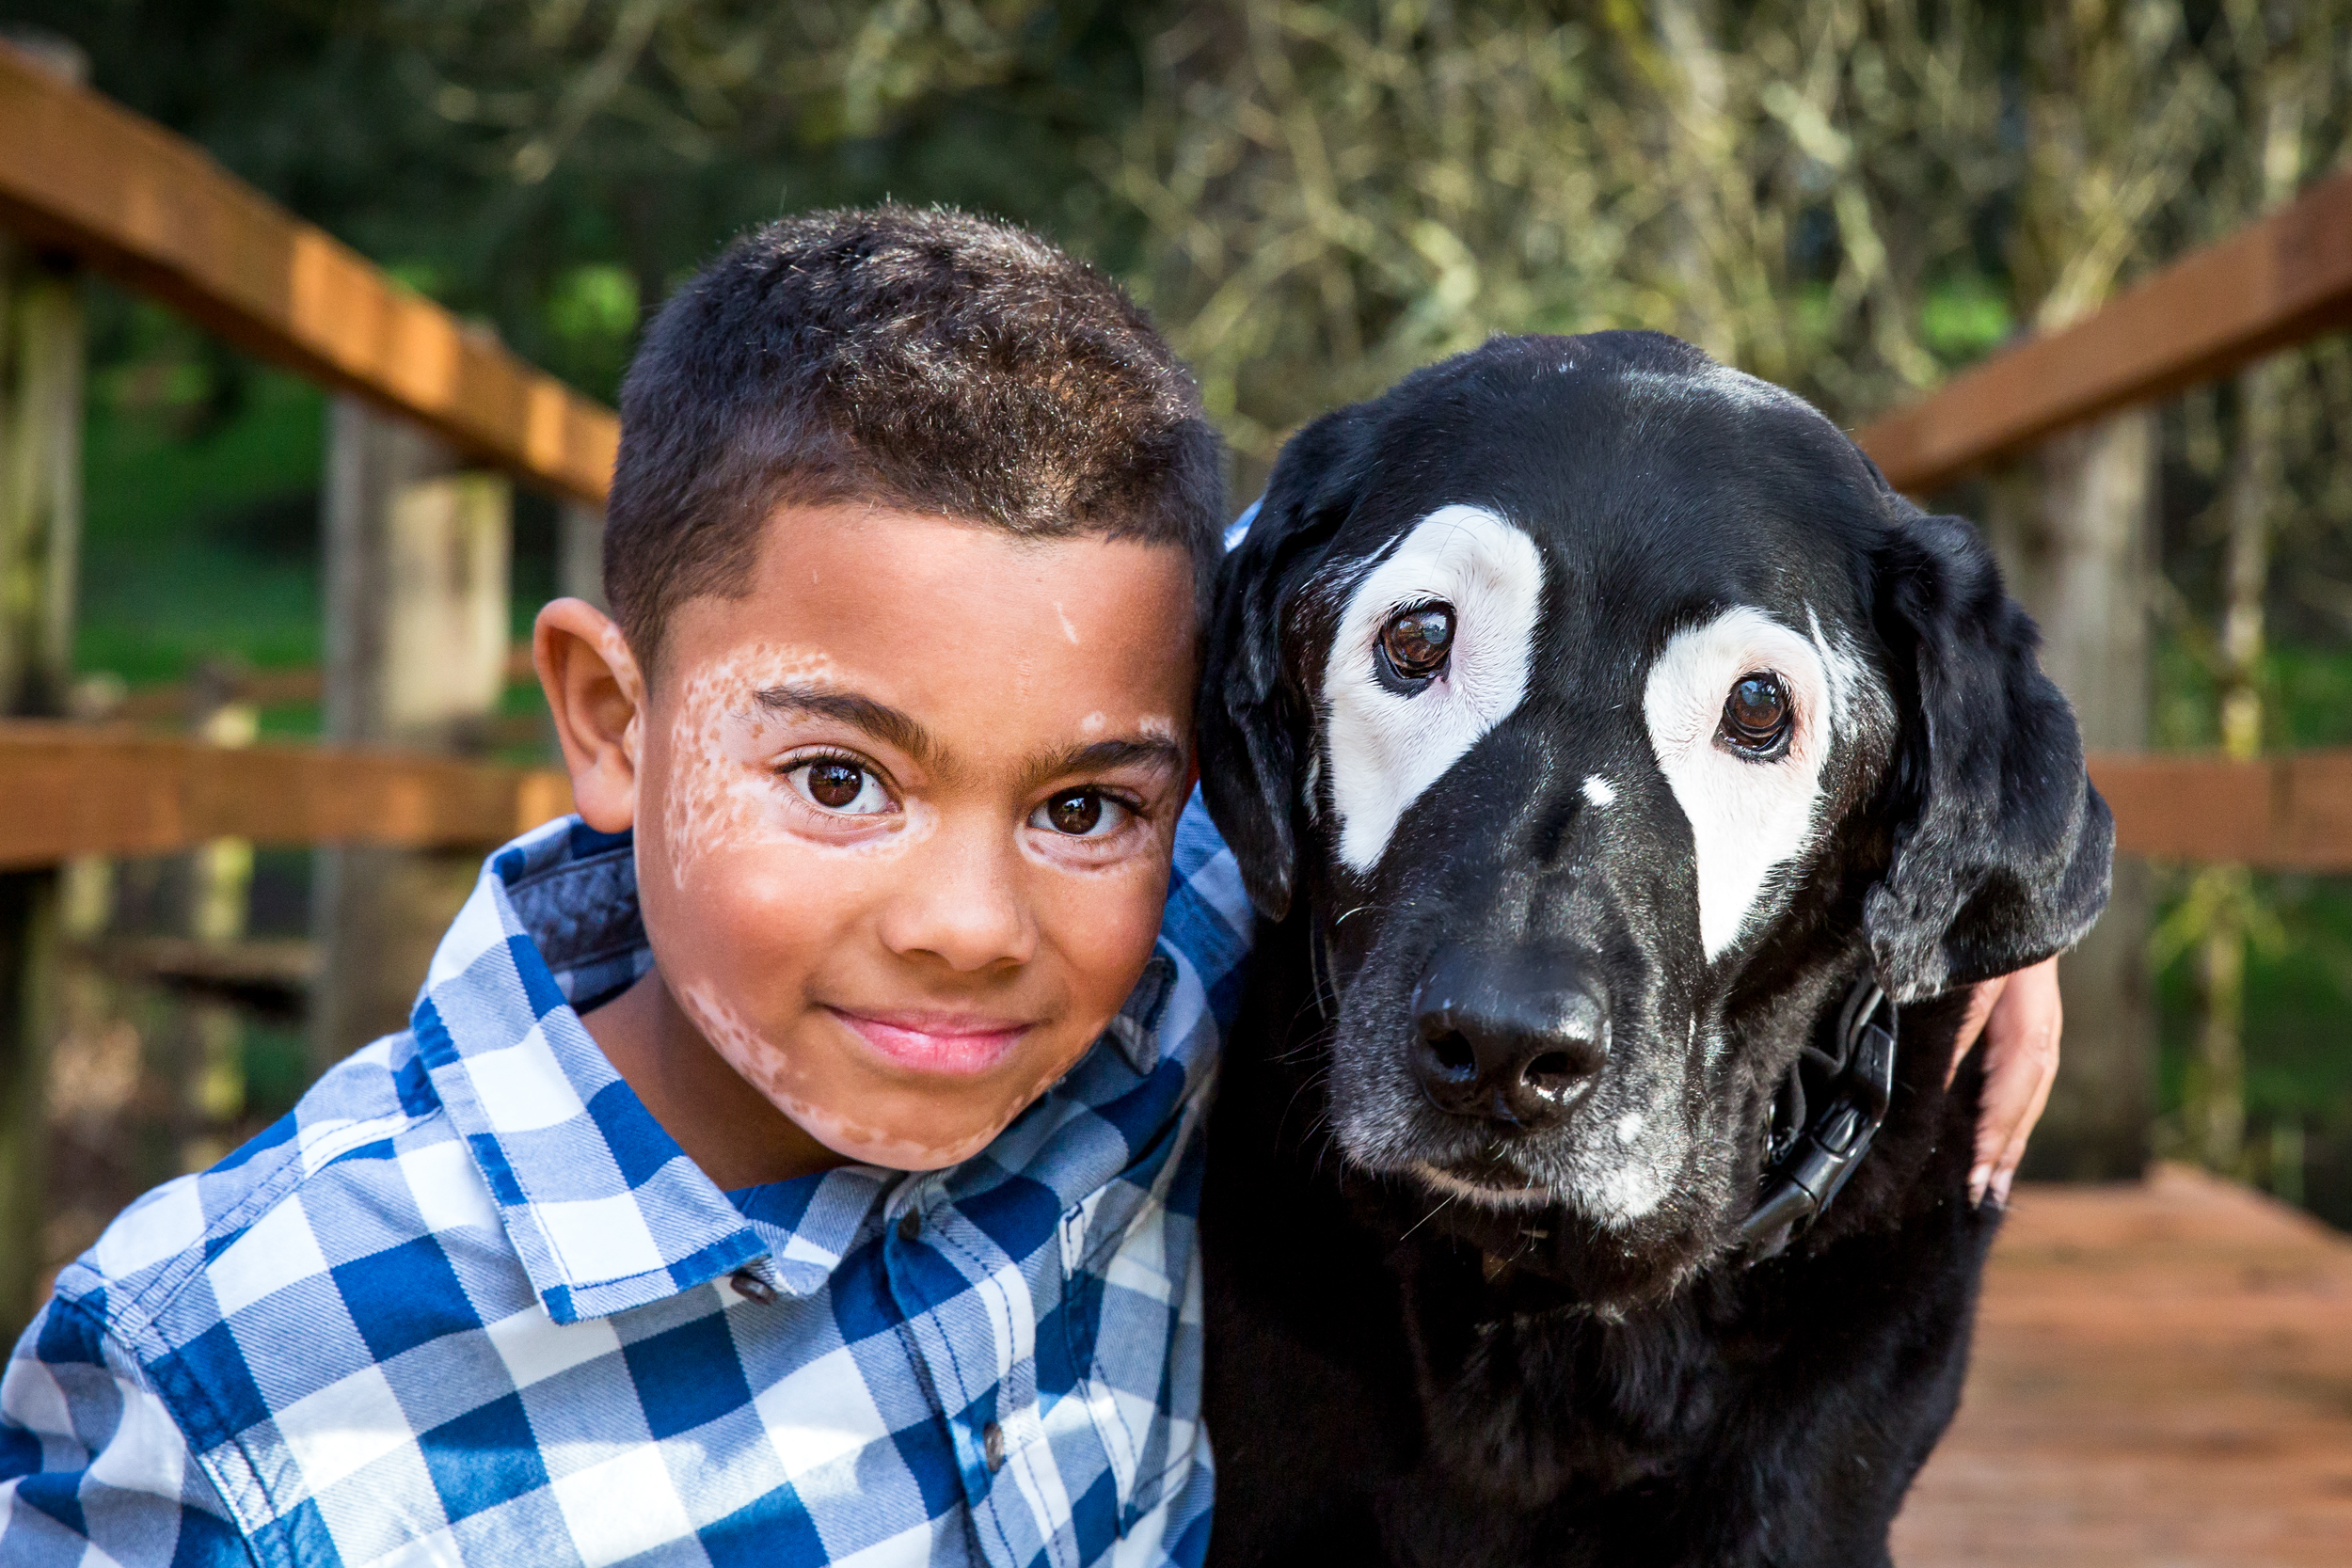 Carter Blanchard, of Arkansas, is pictured here with his new friend Rowdy. Both were diagnosed with Vitiligo, a rare skin disorder. (Lindsay Hile / Sit! Stay Pet Photography)